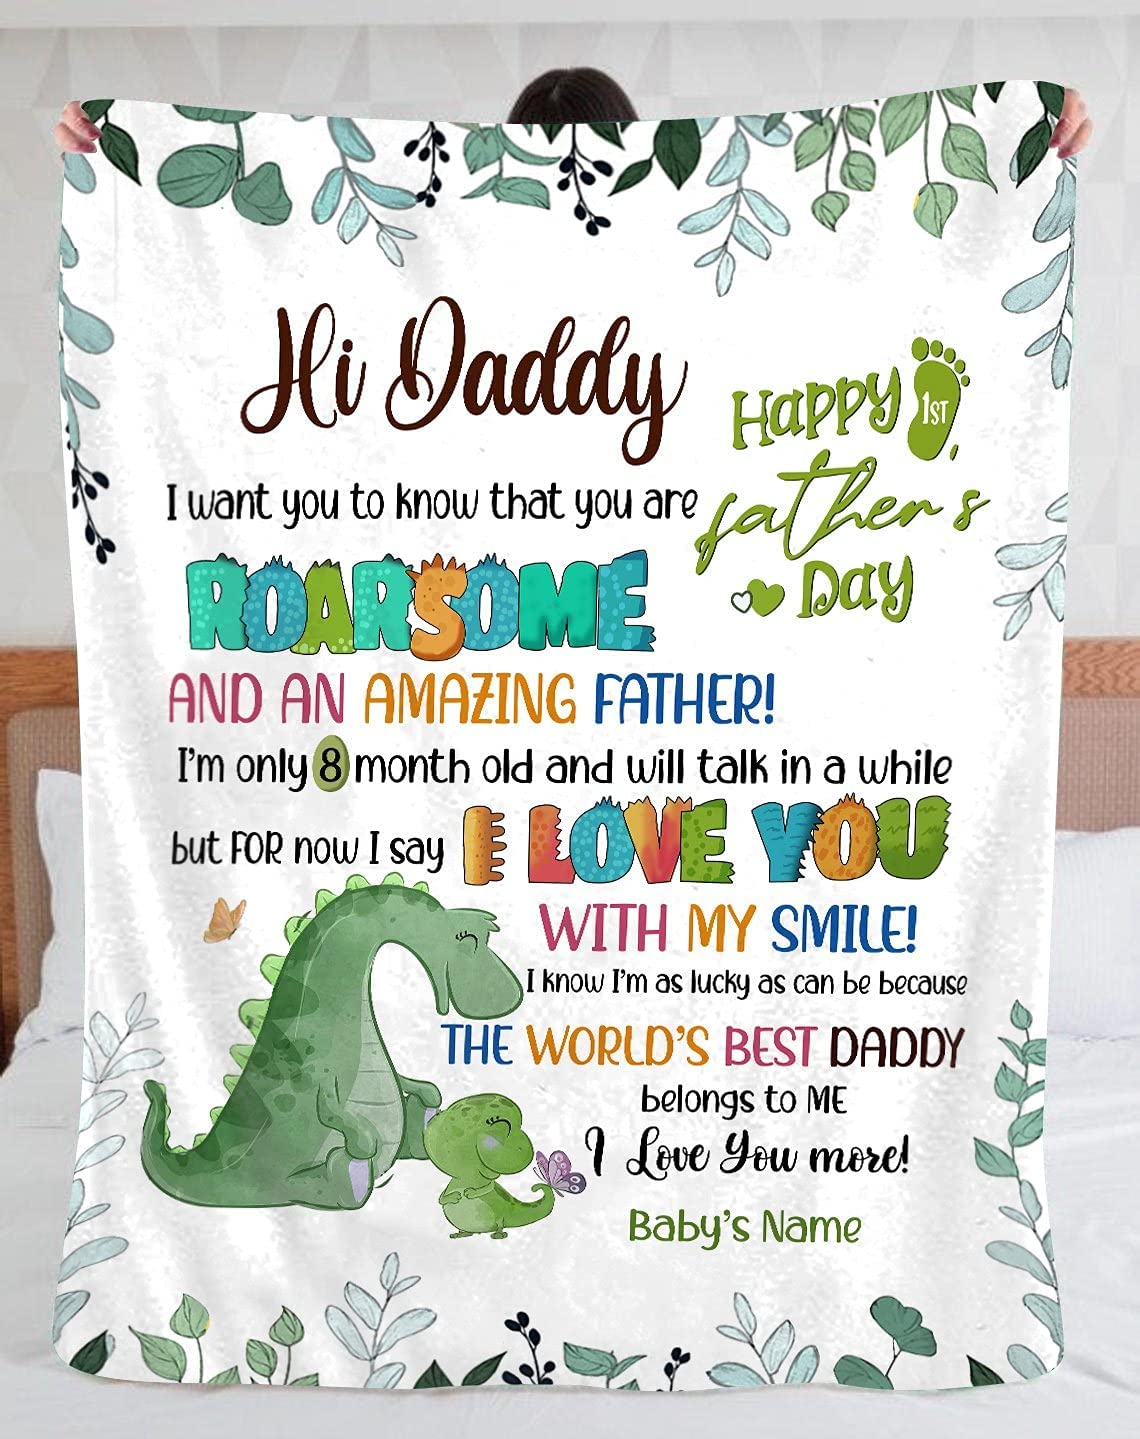 Personalized Hi Daddy Letter Blanket from Newborn Baby,  Happy 1st Fathers Day Blanket, gift for First Dad